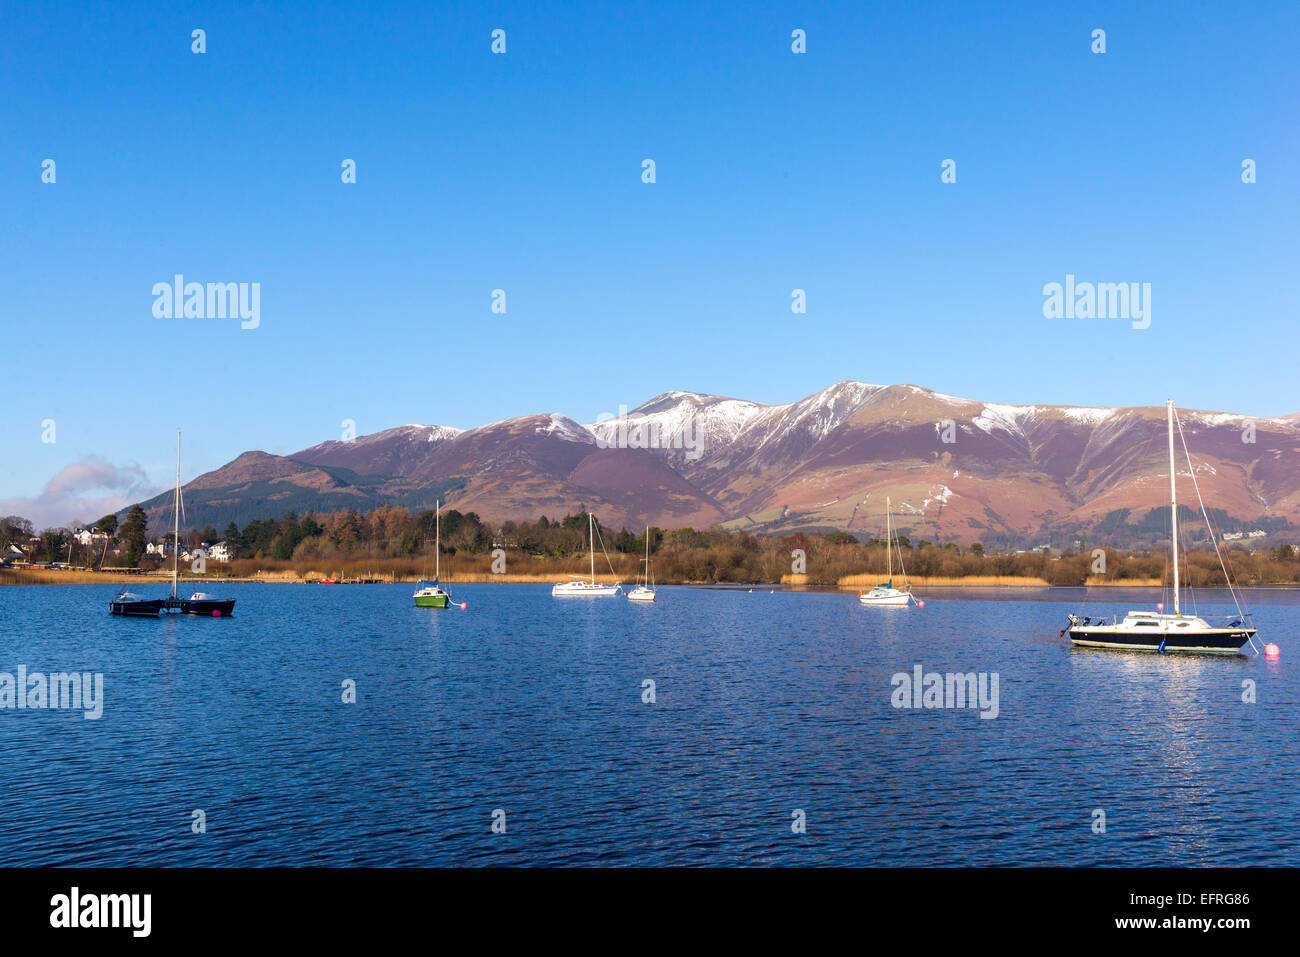 Portinscale, Keswick, Derwent Water, Lake District, England, UK. Banque D'Images